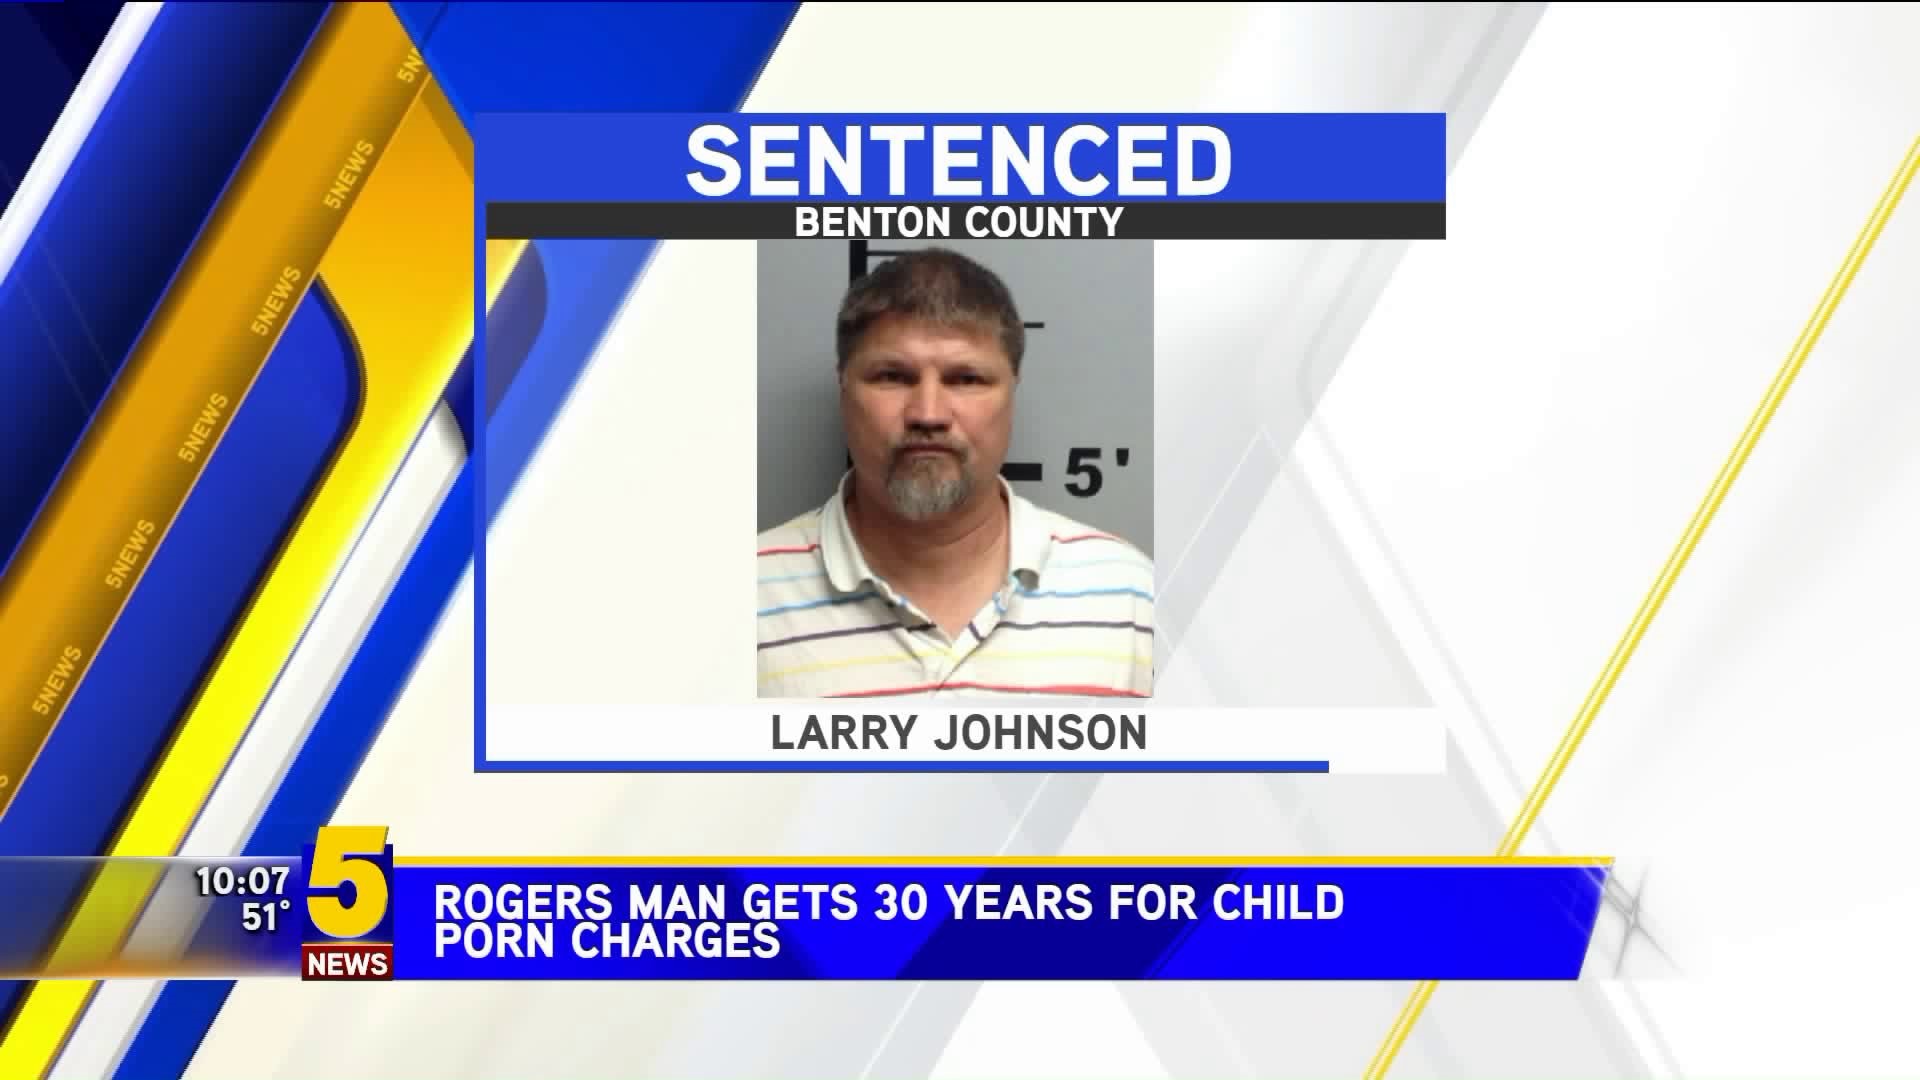 Rogers Man Sentenced to 30 Years for Child Porn